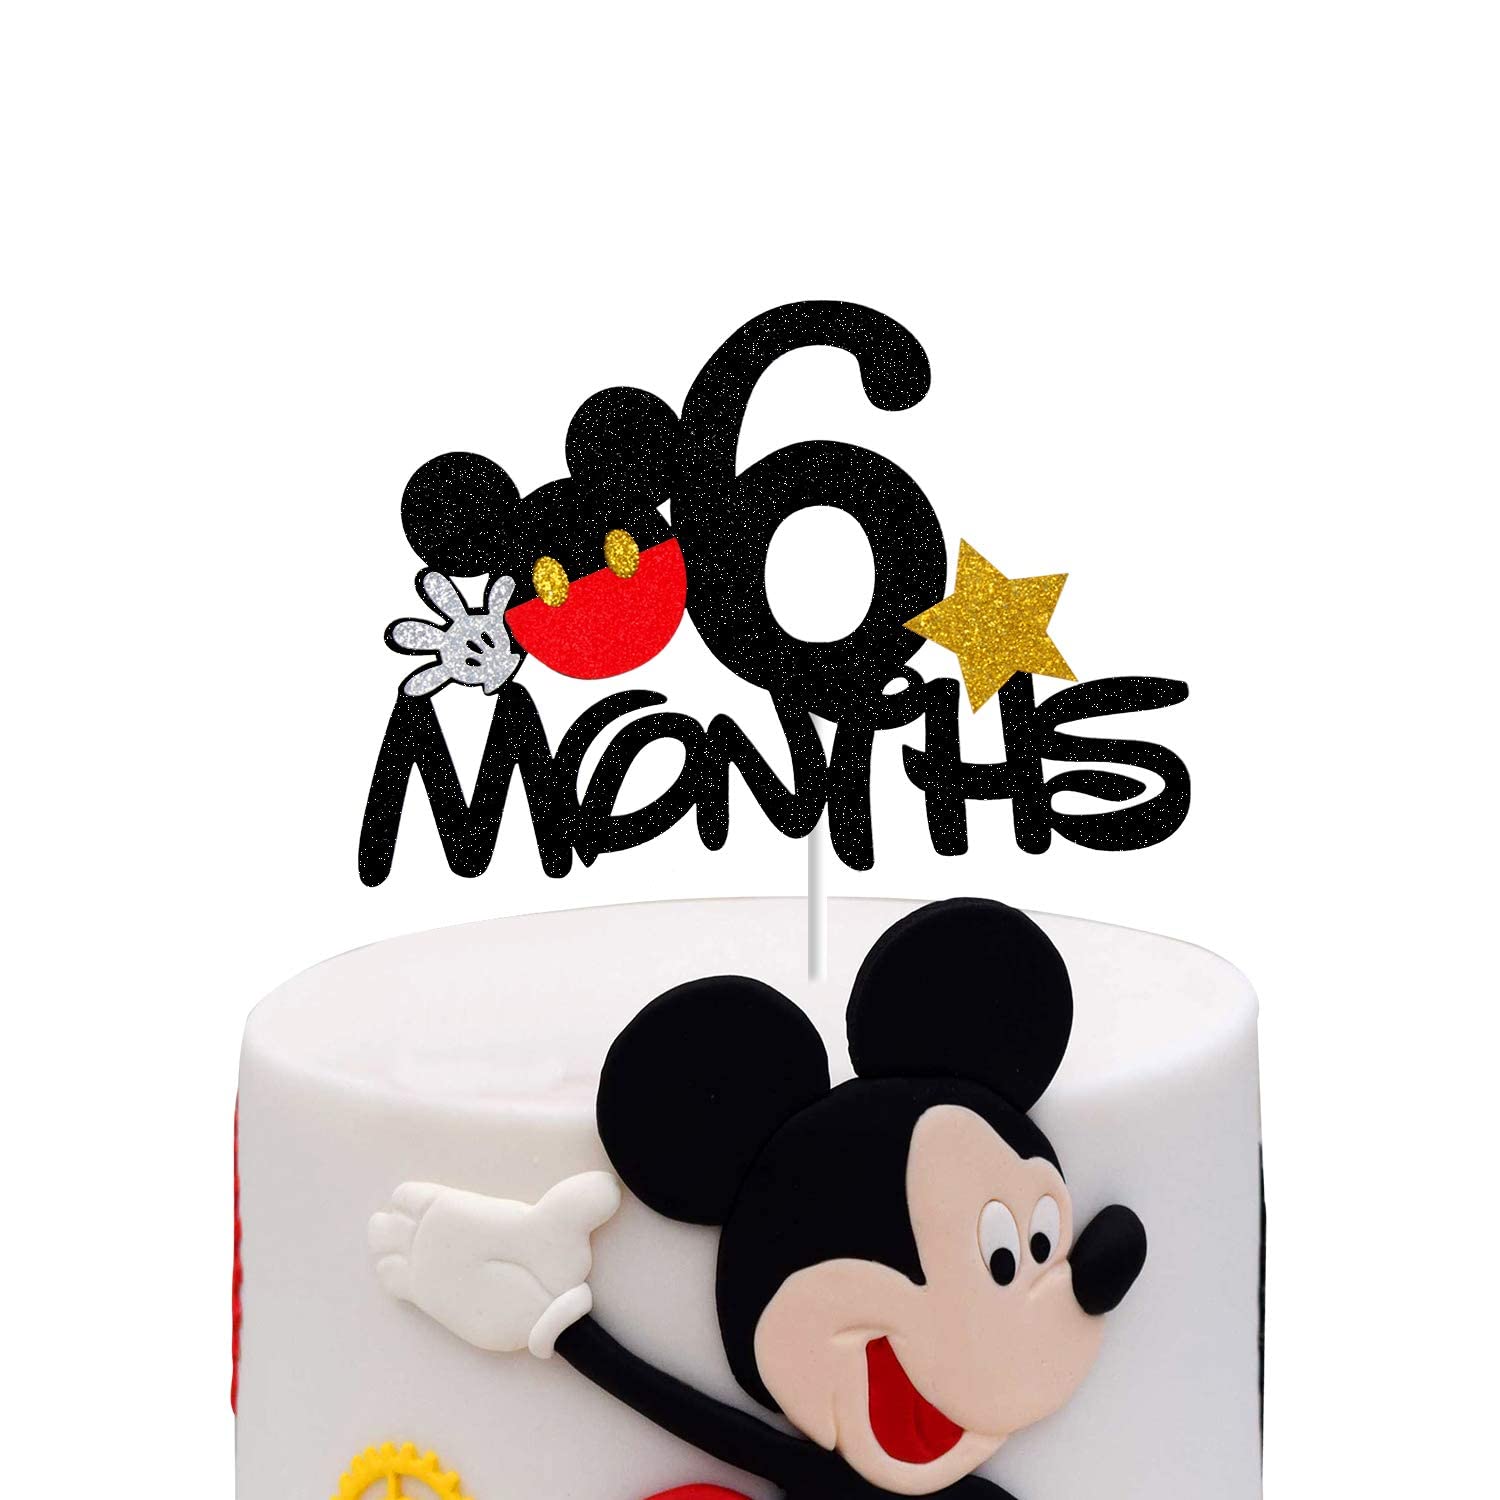 Ayaoch Mouse 6 Months Cake Topper,Mouse 1/2 Half Birthday Party Decorations, Happy 6 Months Cake Topper,Pregnancy Party Cake Decor.